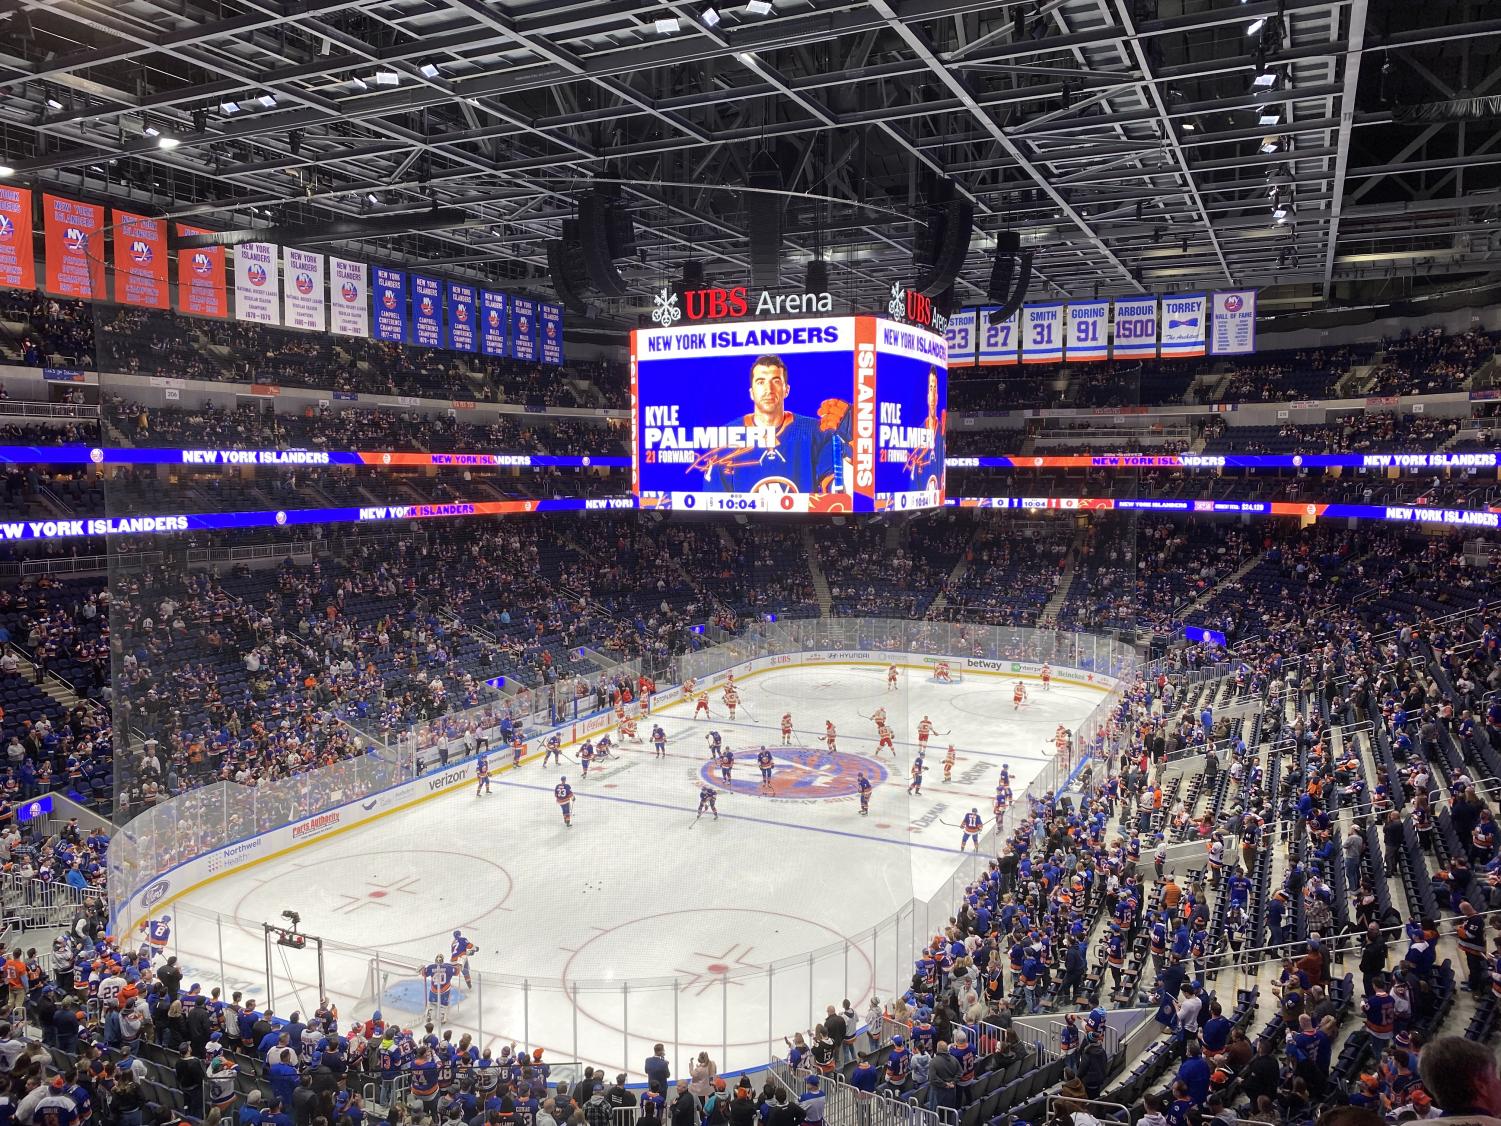 UBS Arena, Islanders' new home, opens after agonizing fails